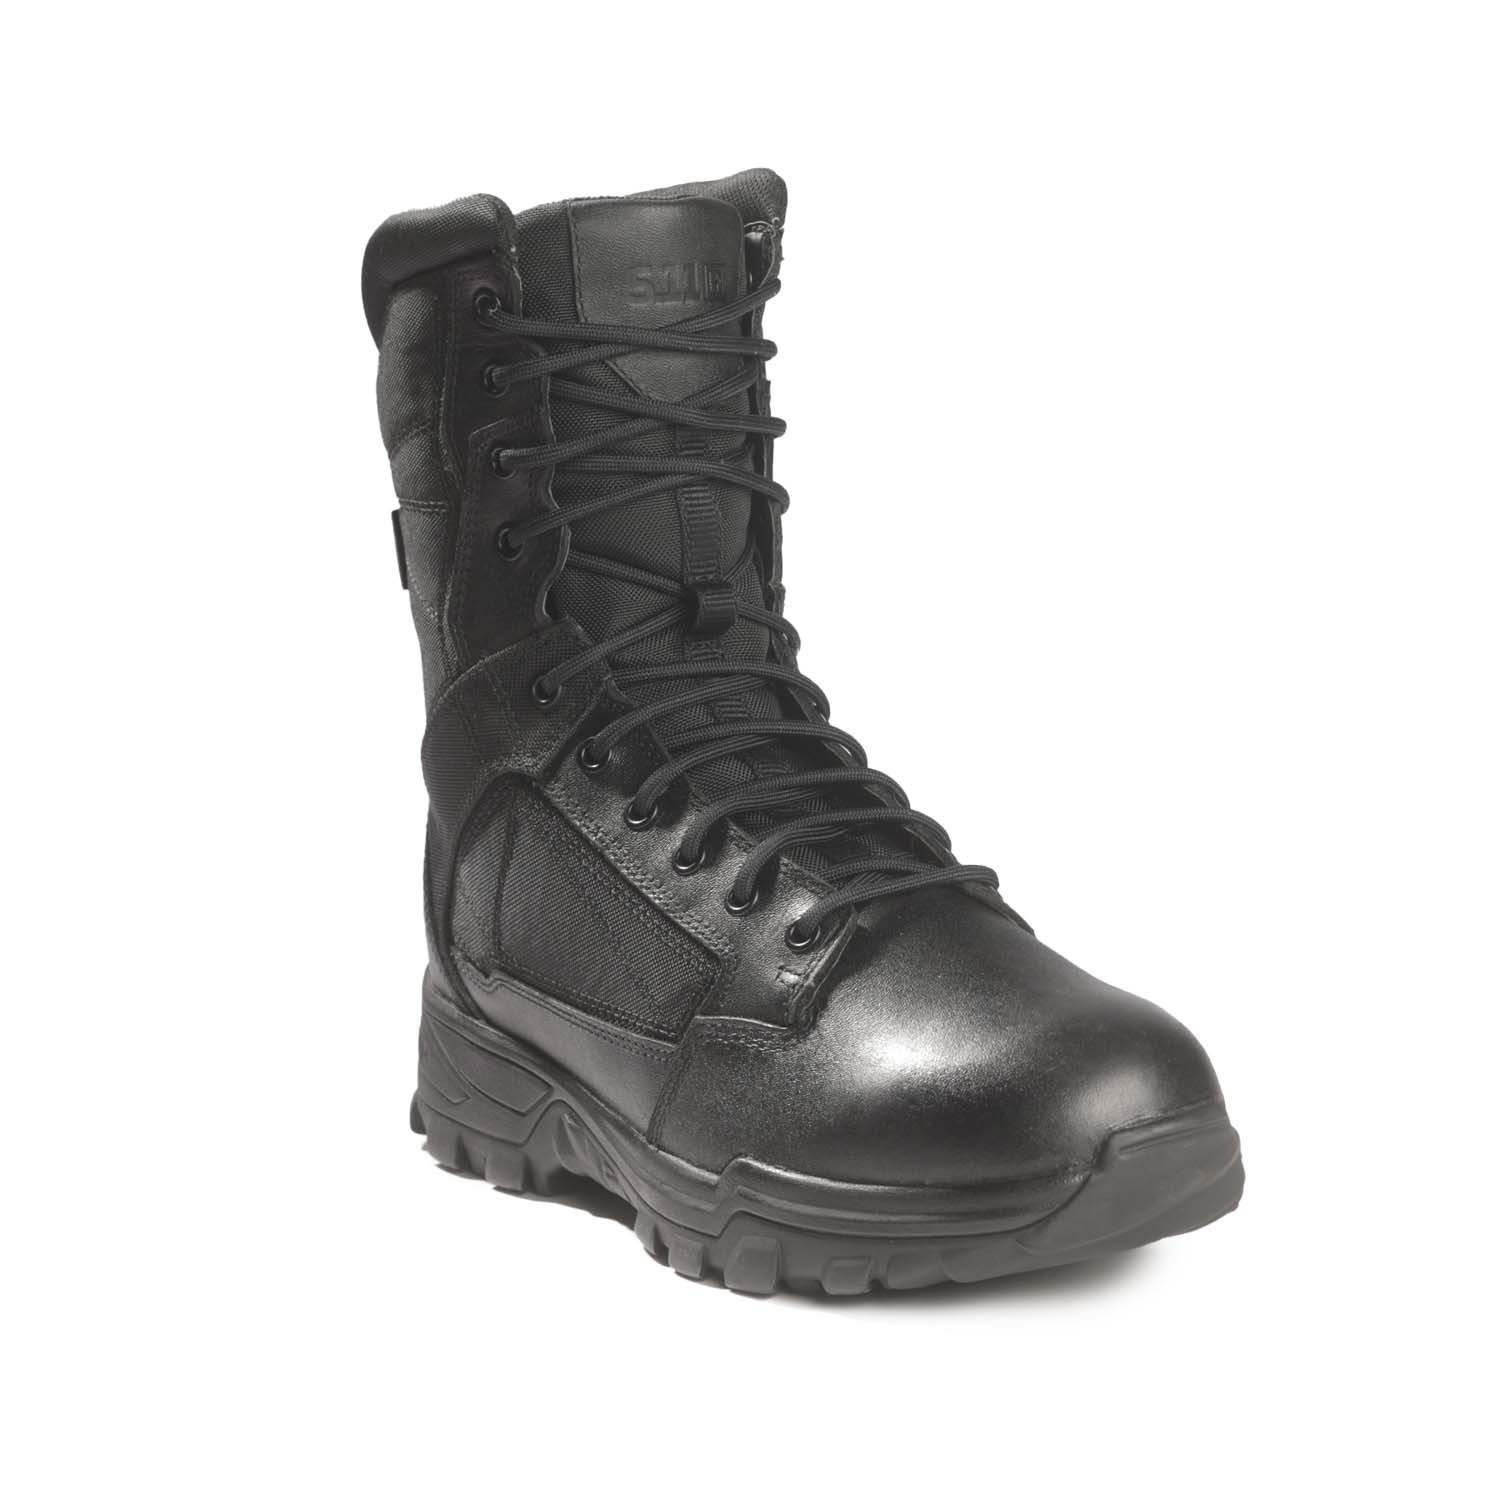 5.11 Tactical Fast-Tac 8" Waterproof Insulated Boots